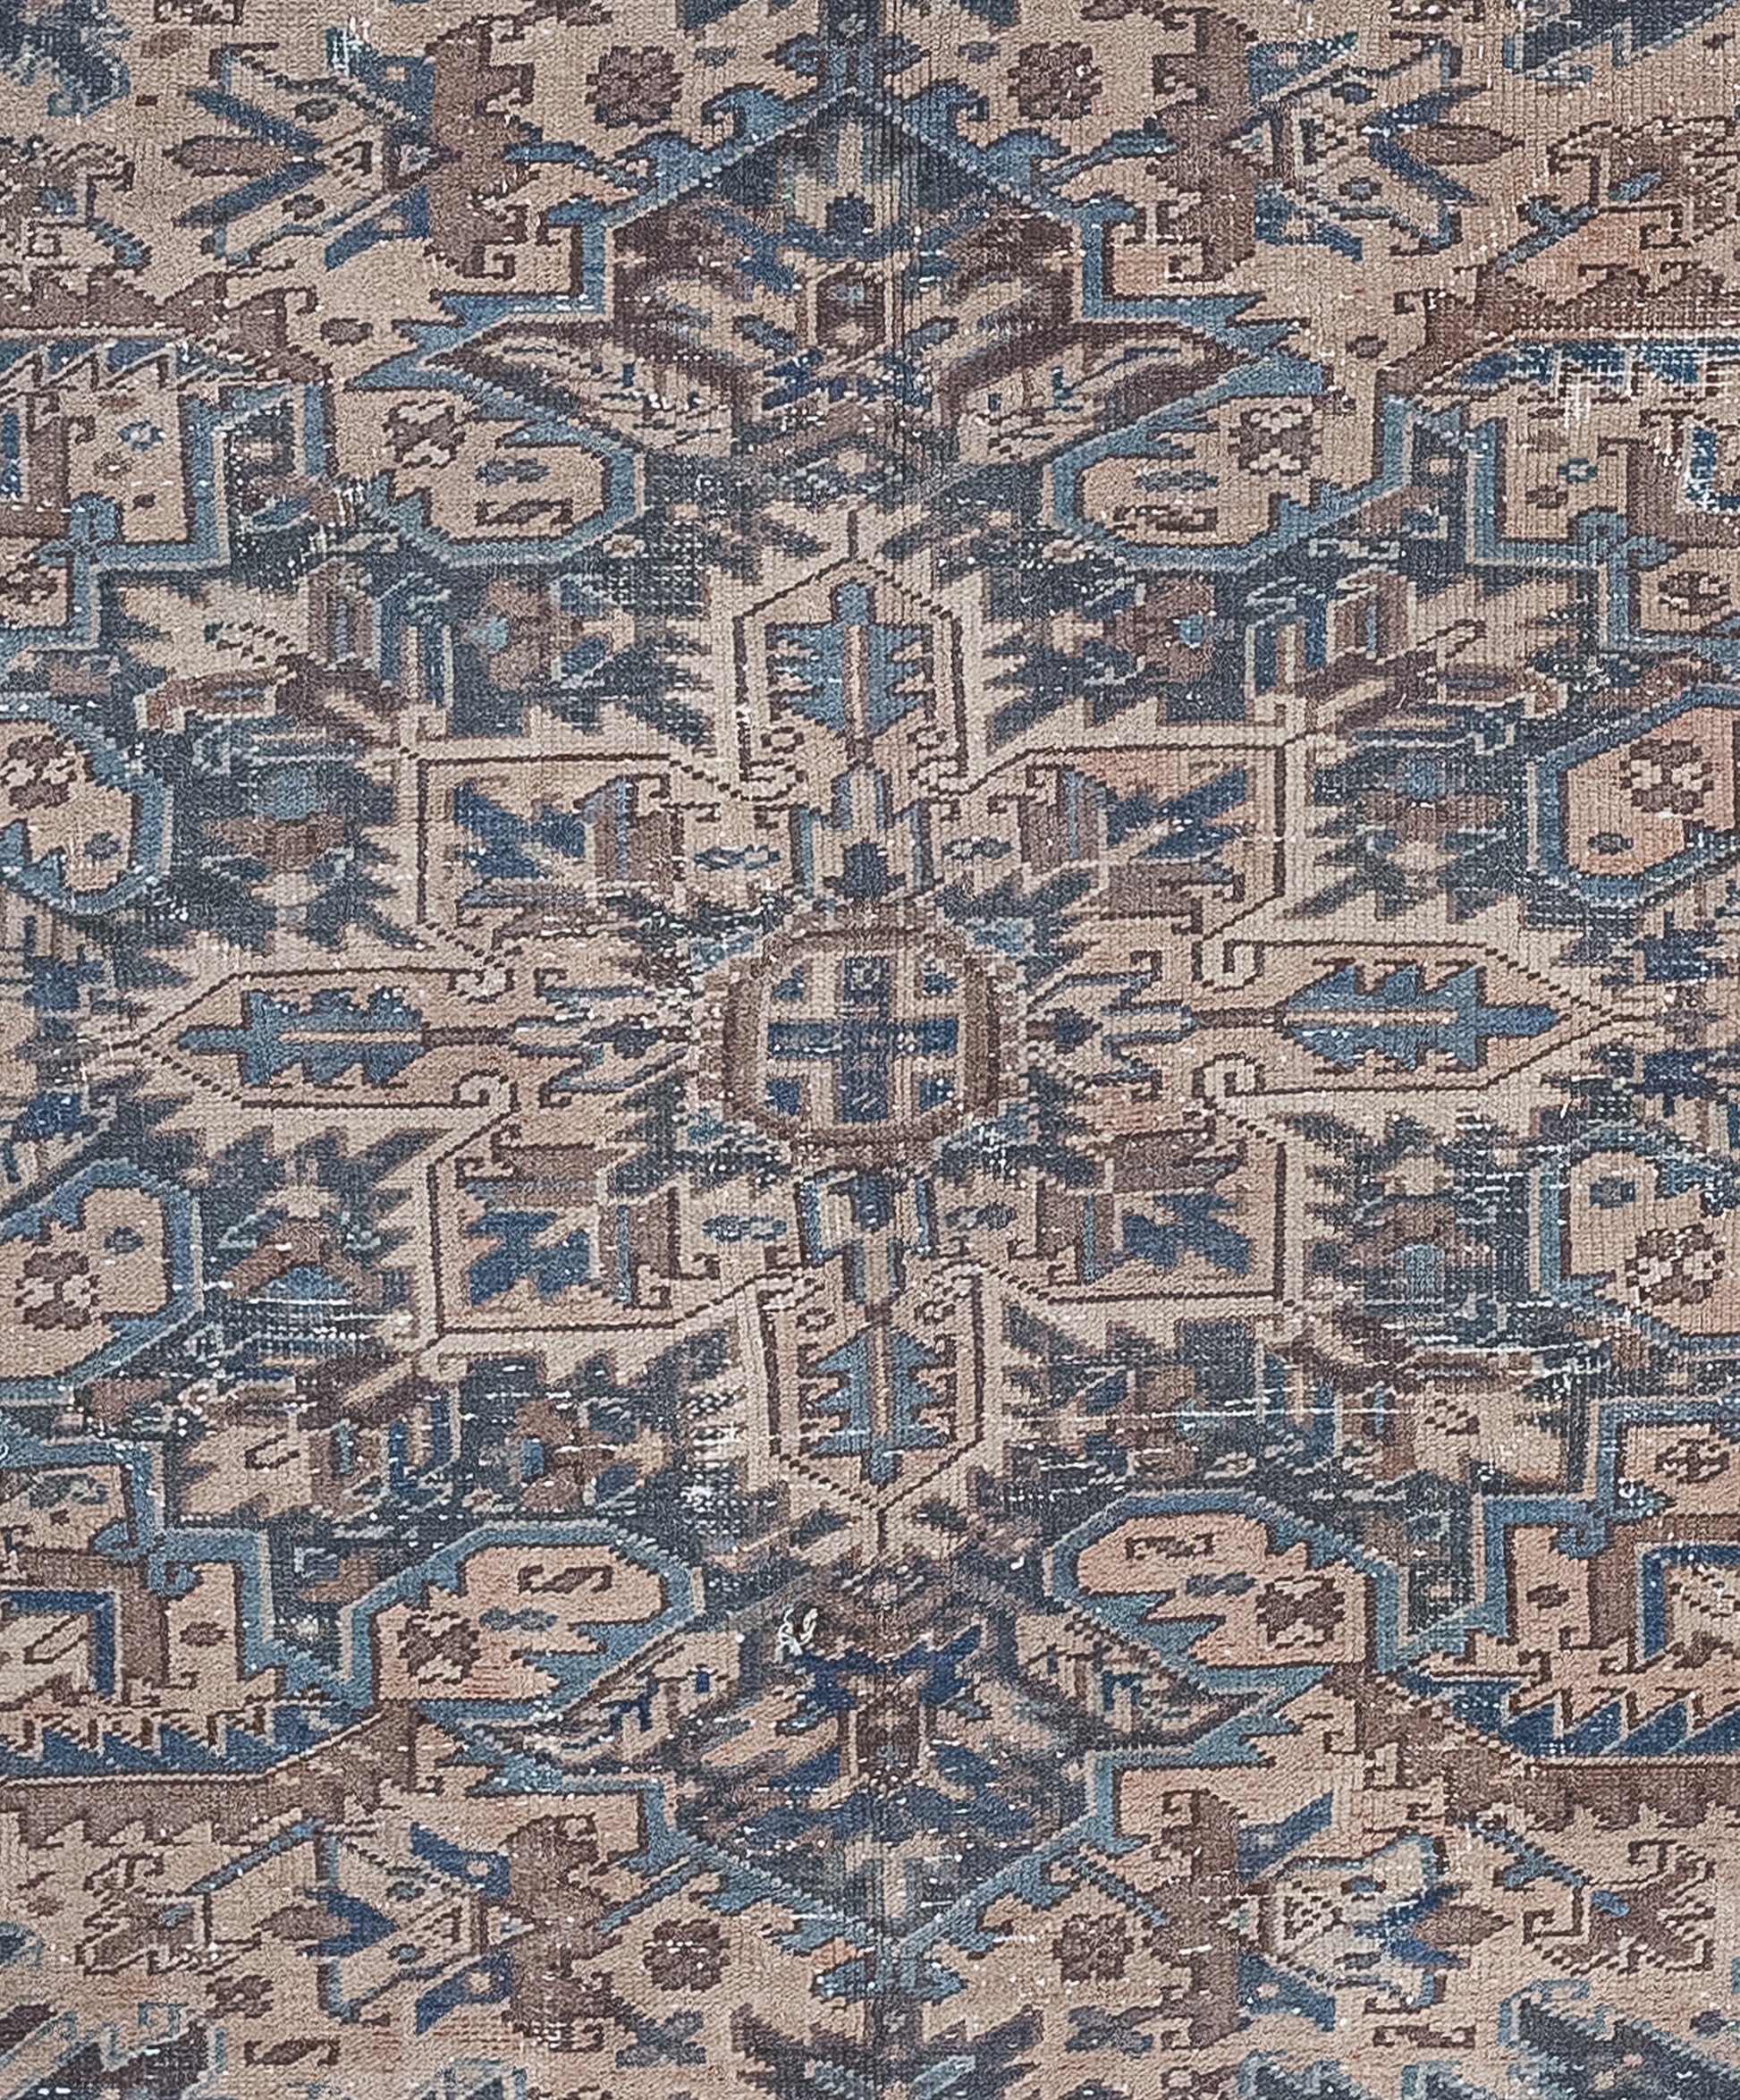 The close-up features many symbols arranged into rhombus' shapes that have pointed vertices all over the rug.